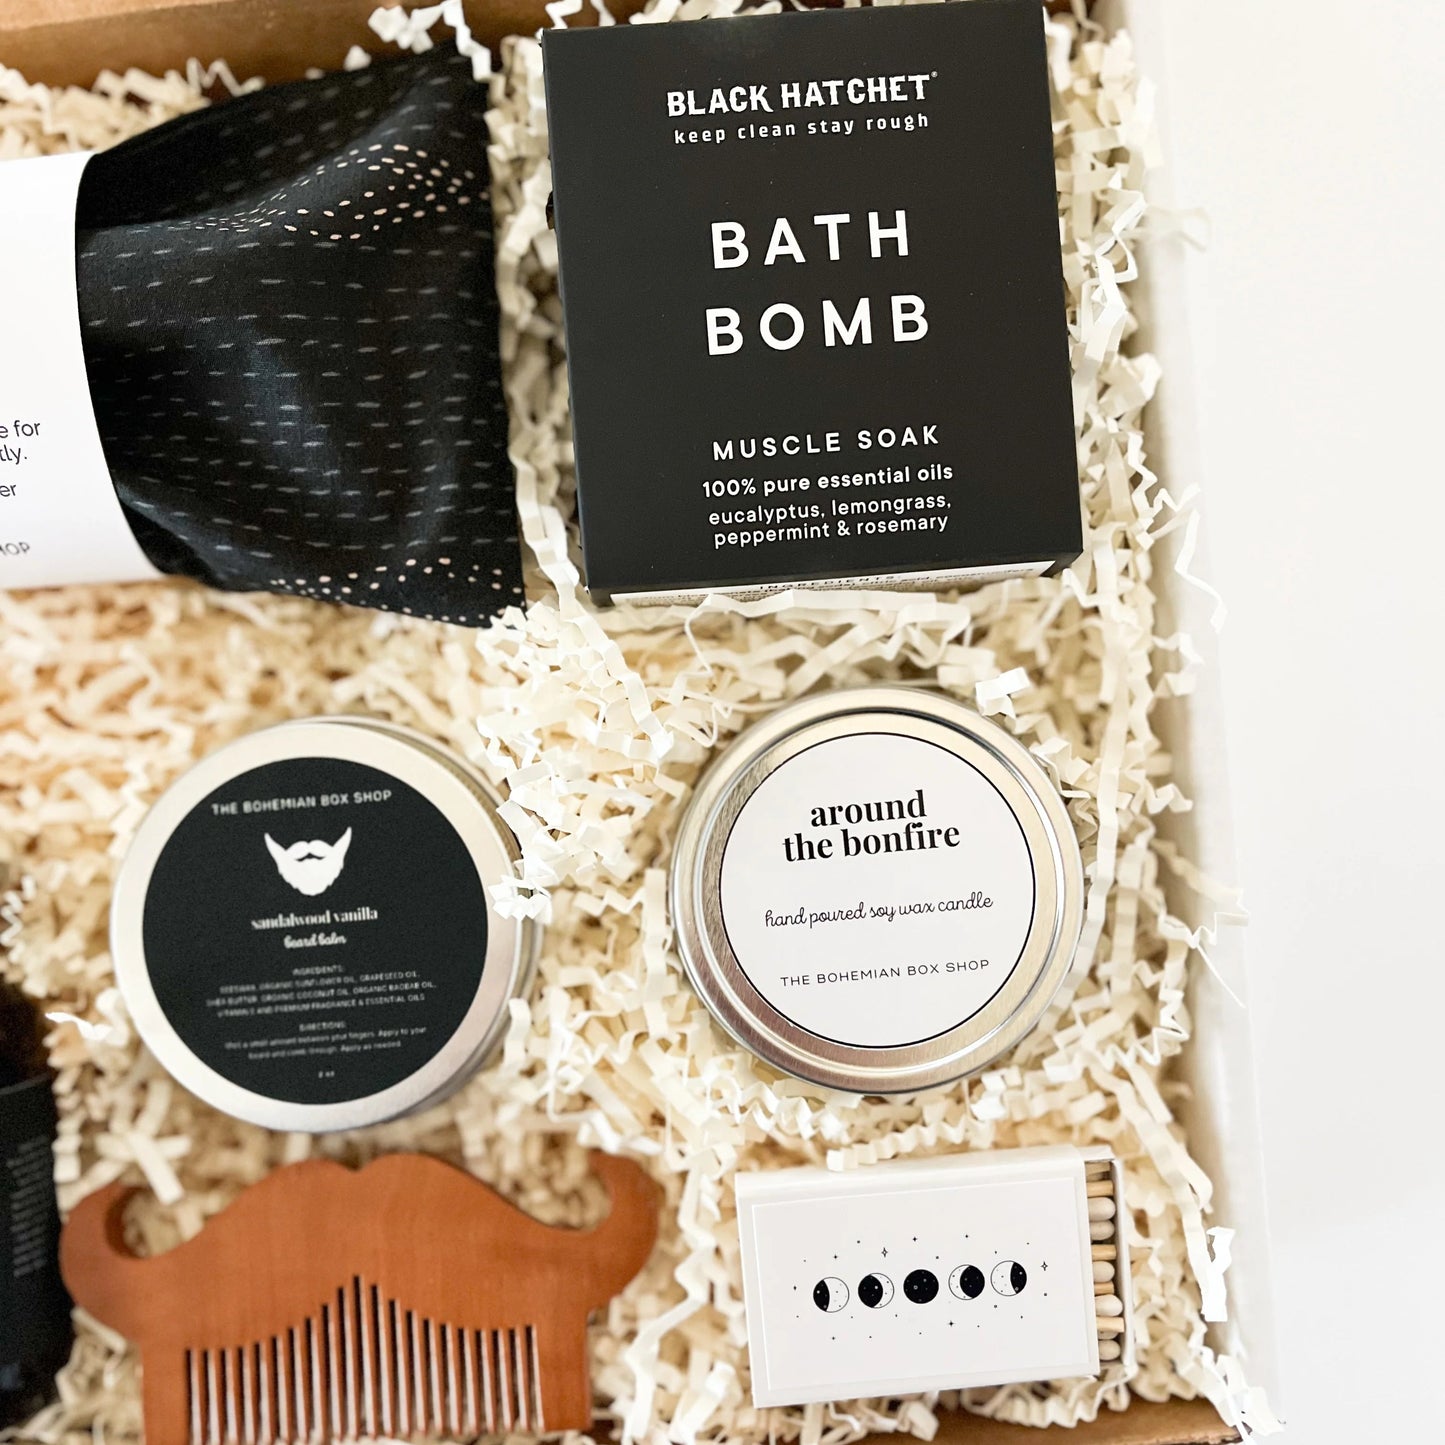 Black & White Men’s Curated Gift Box. Includes lavender eye pillow, bath bomb, harvest moon red chai tea, beard care kit, around the bonfire soy candle, and moon phases matchbox. 